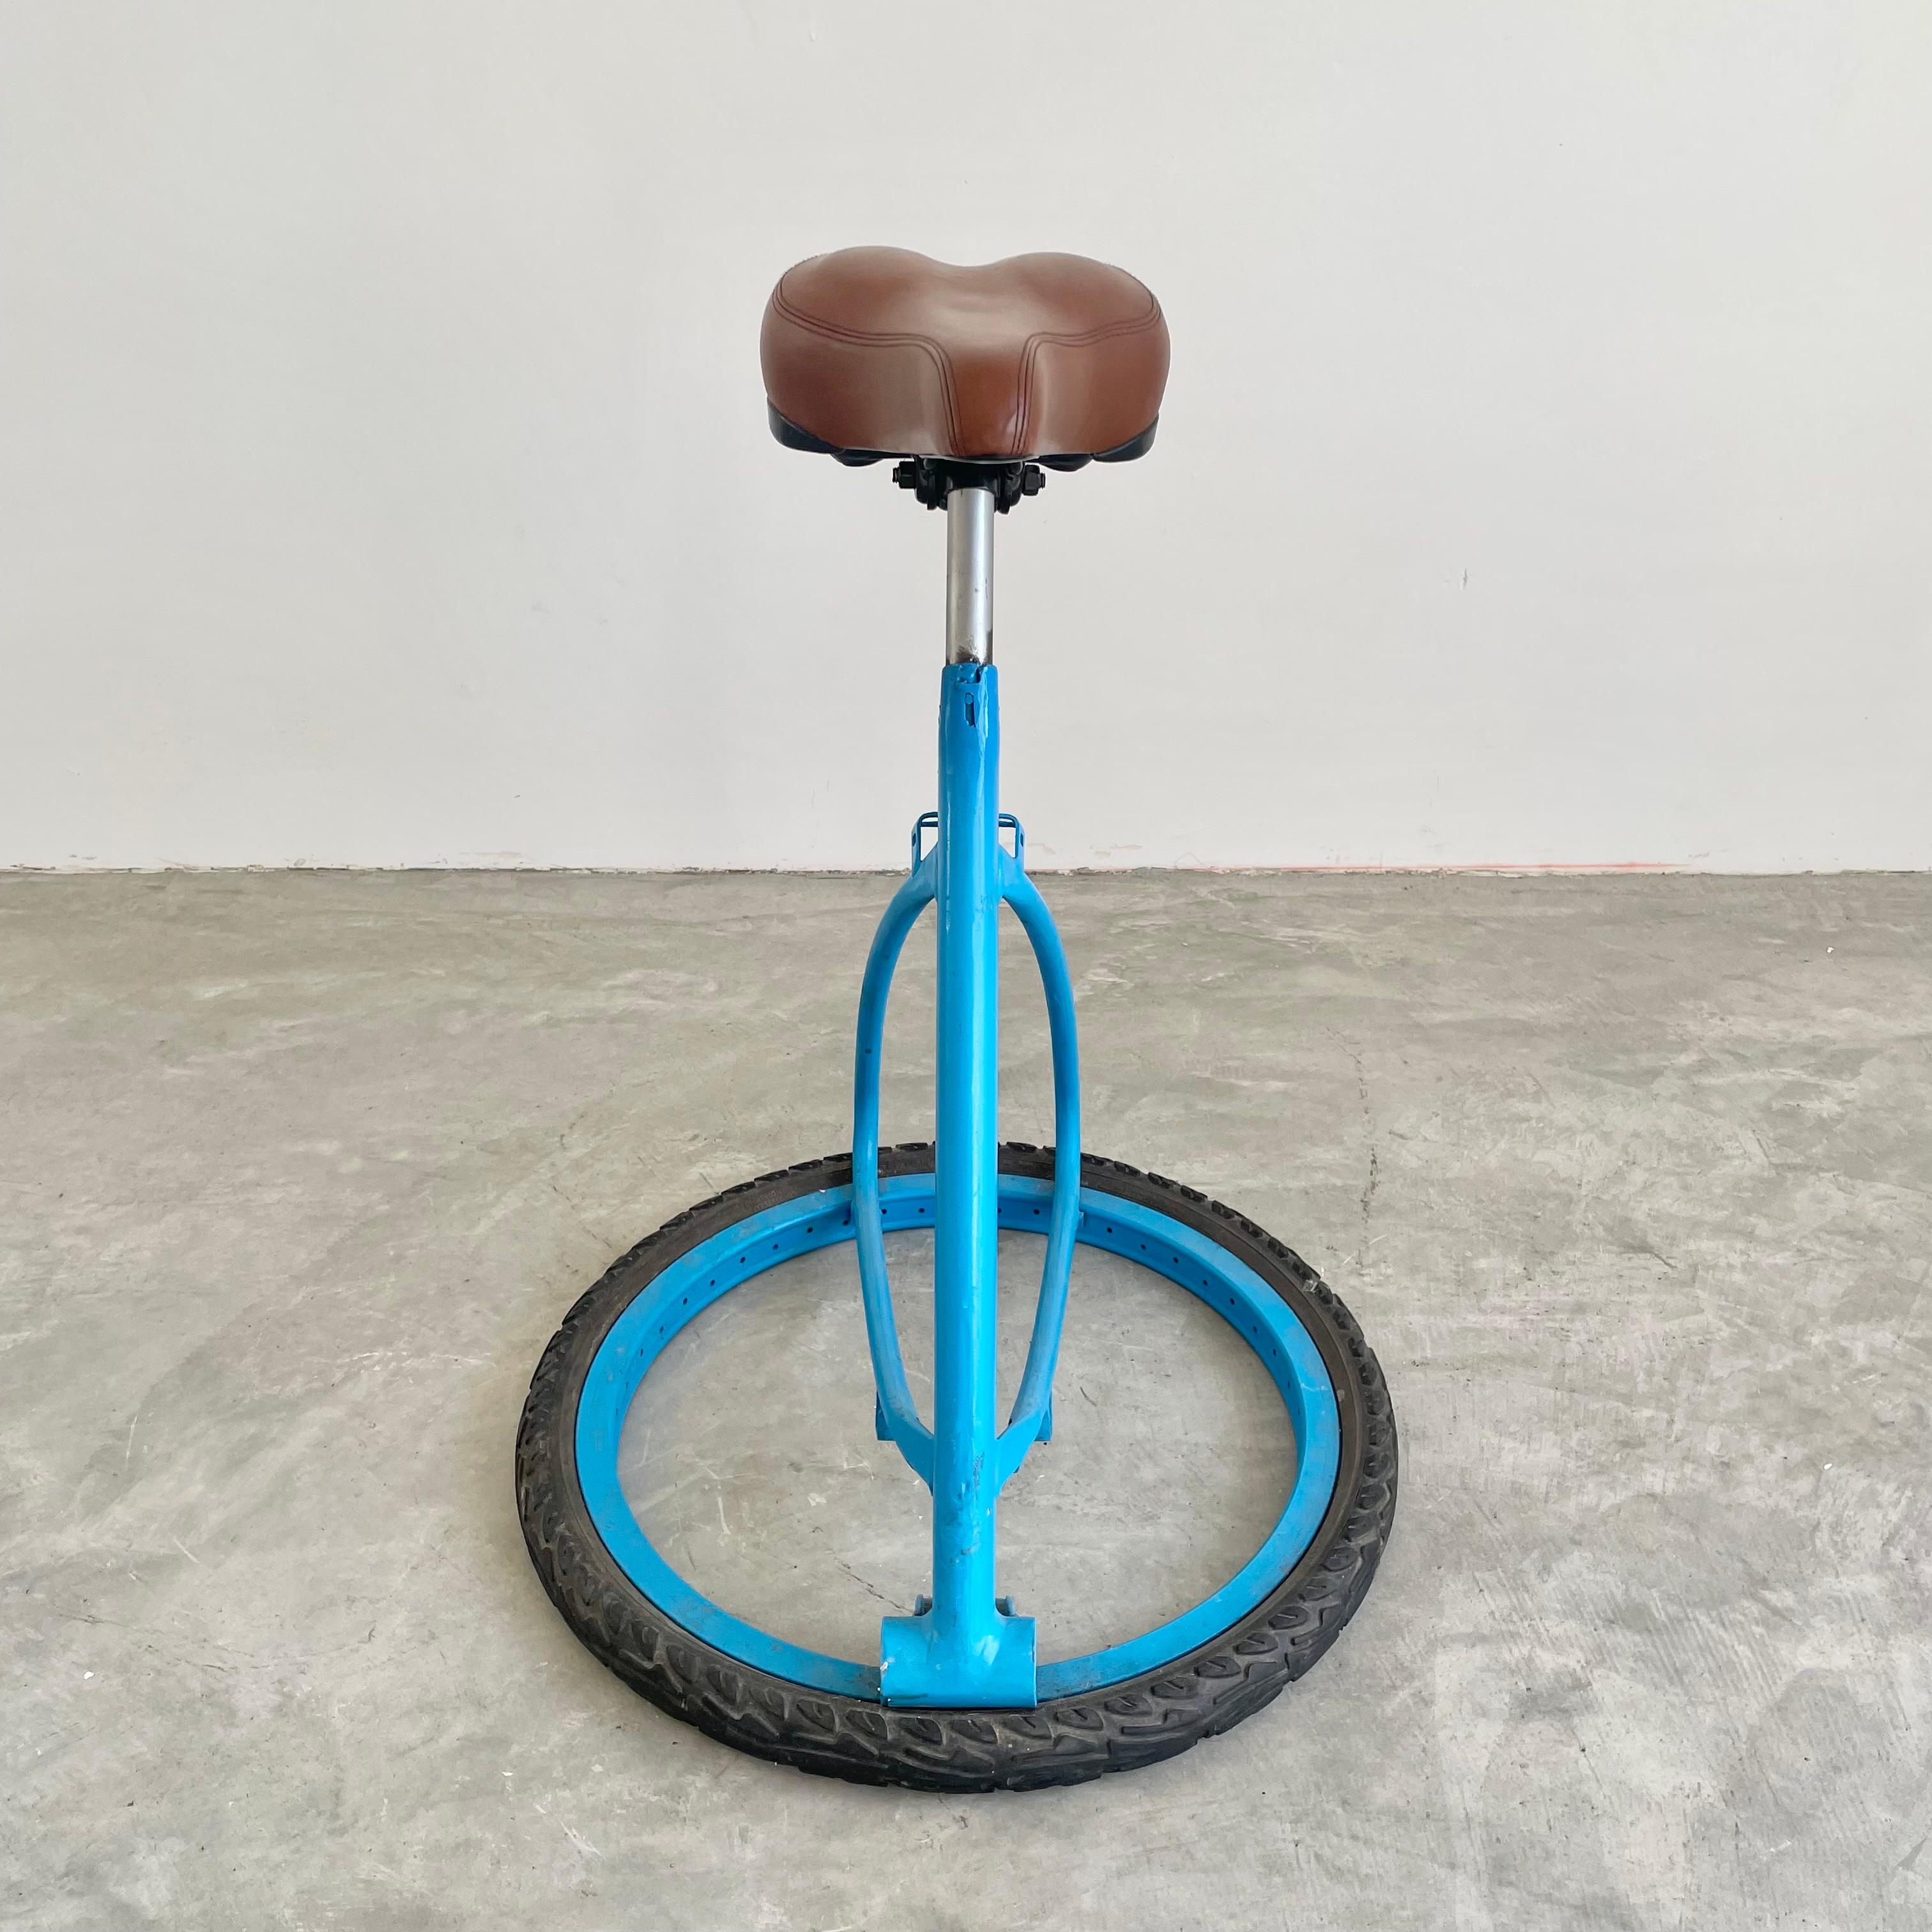 Unique bicycle style stool made in France, circa 1980s. Unique design with great contrasting colors from the brown seat to the electric blue body and the black rubber base. Perfect patina and age to this piece. Functional stool with a well cushioned